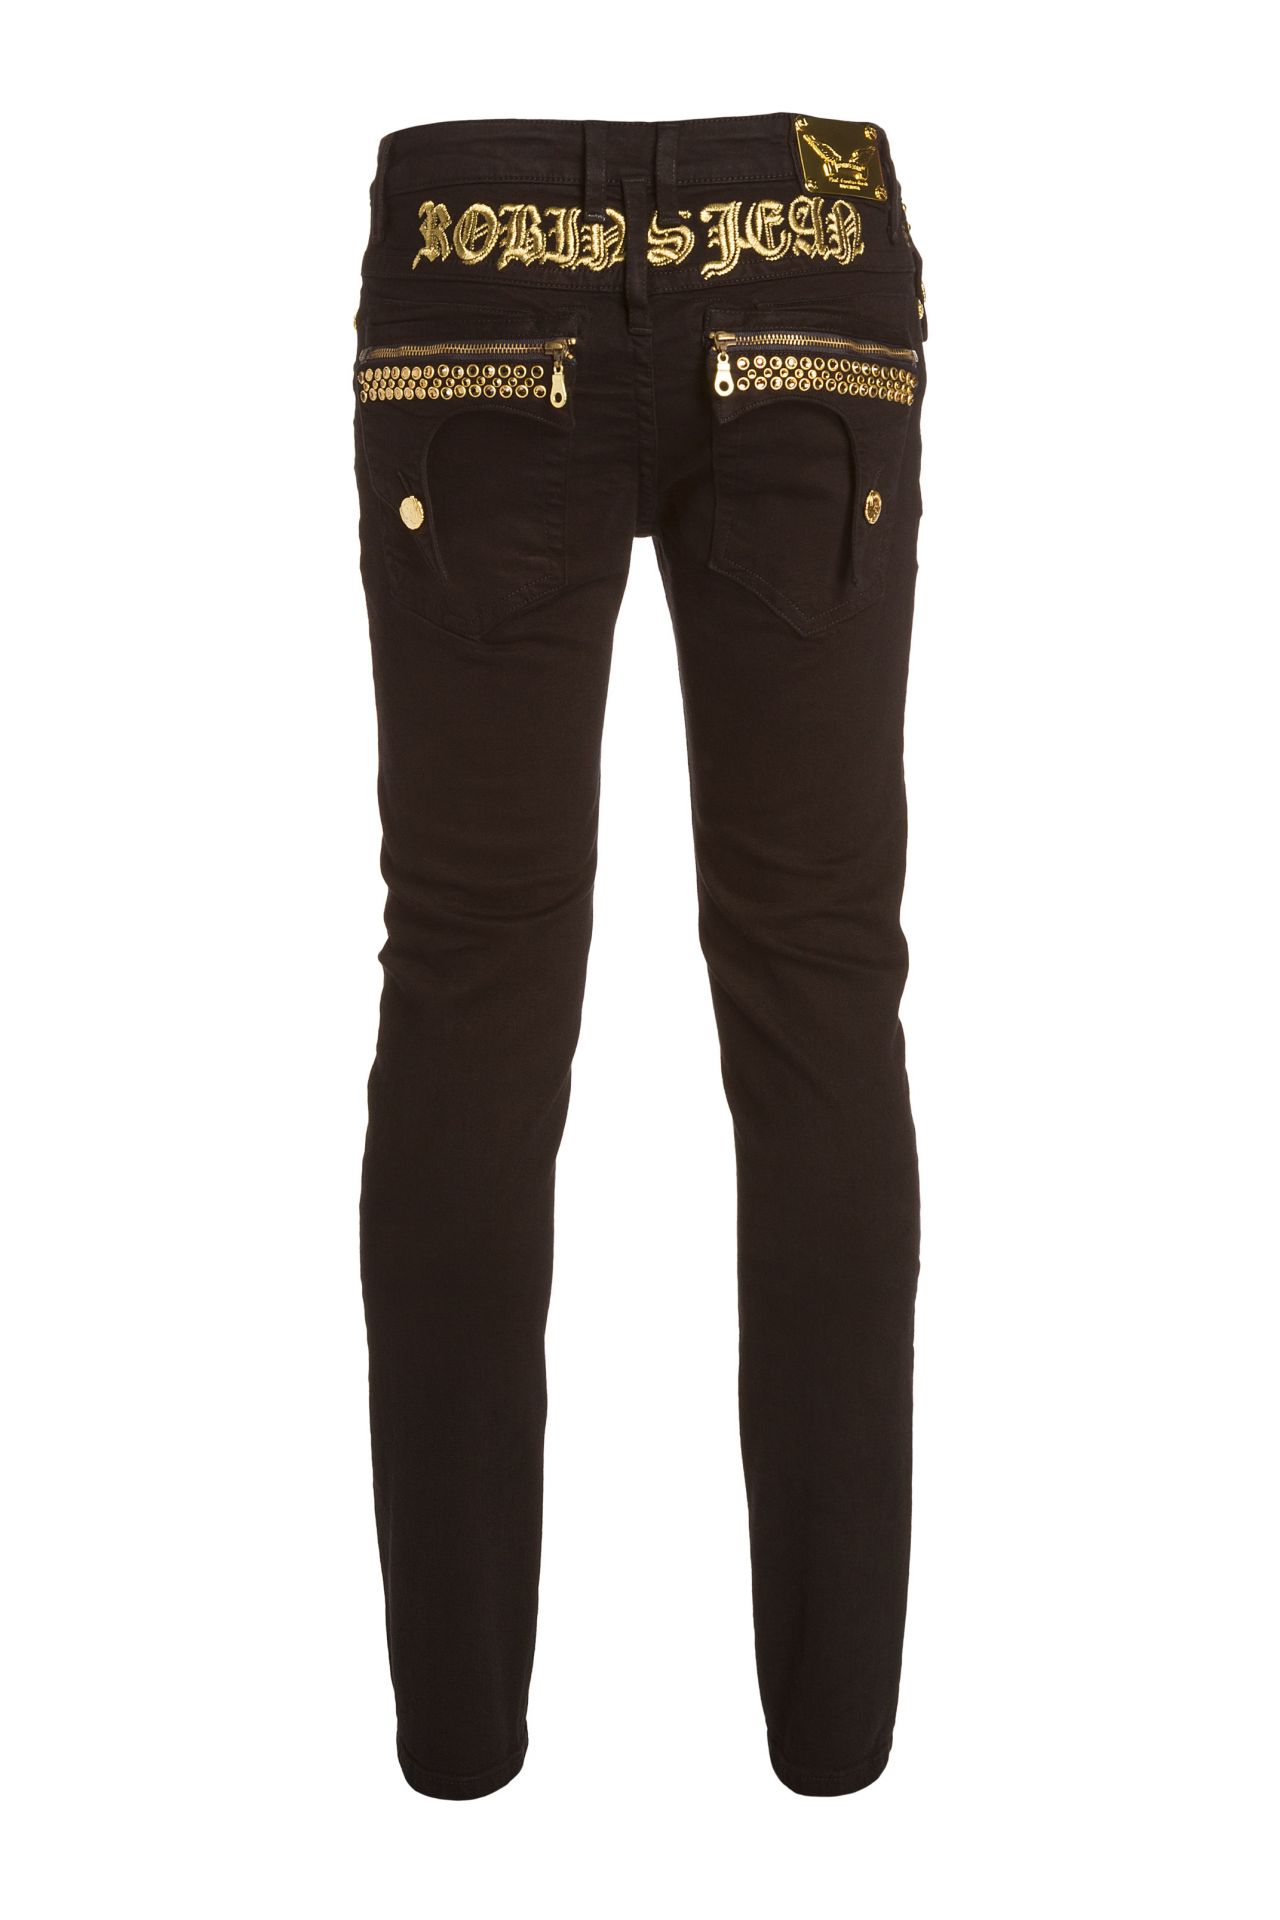 ZIPPER KILLER FLAP MENS SKINNY JEANS IN BLACK WITH GOLD CRYSTALS